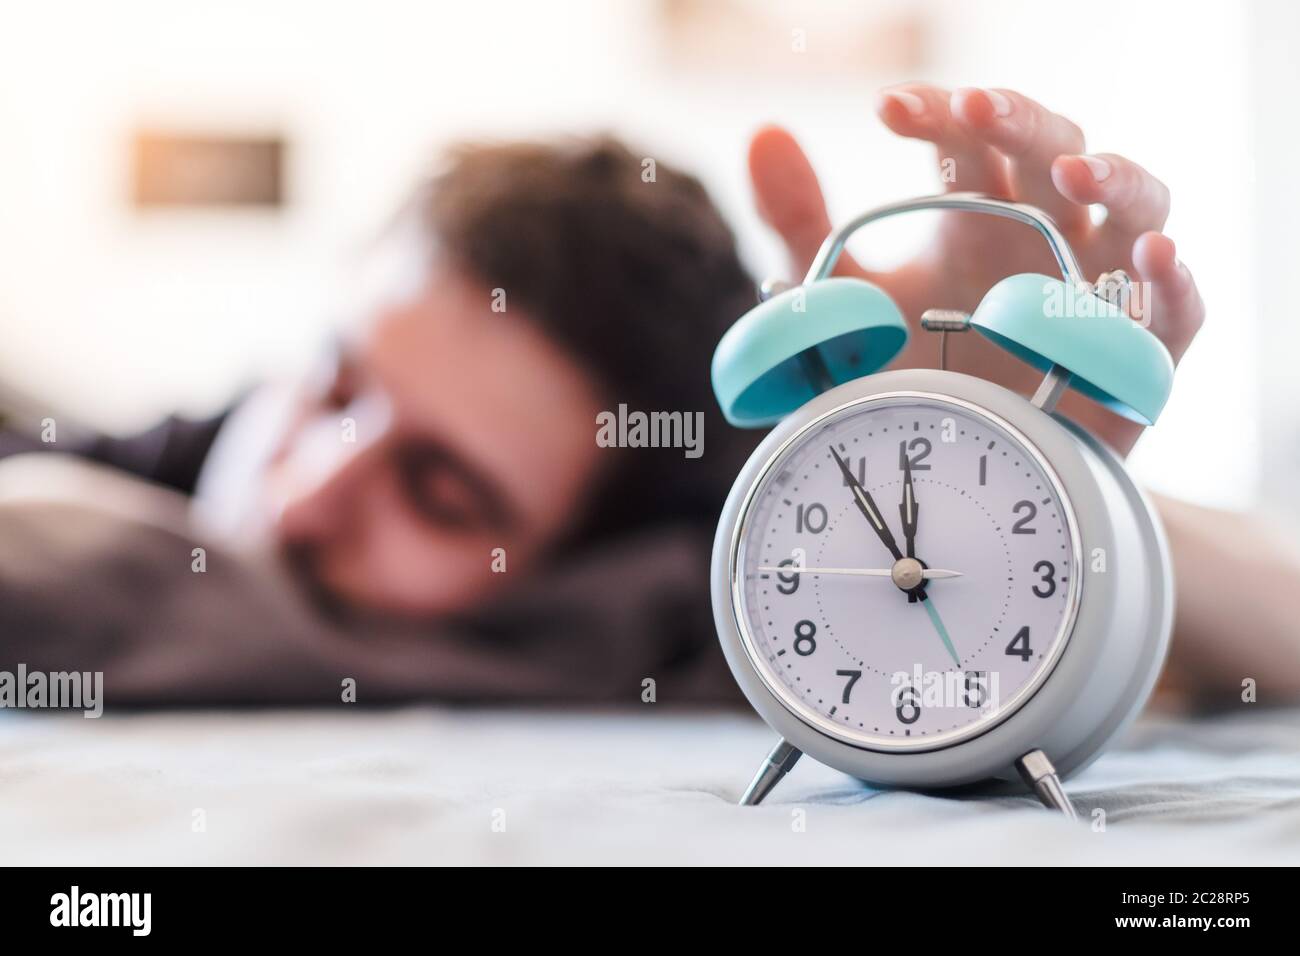 Alarm clock in the morning. Young wakes up in the blurry background. Stock Photo